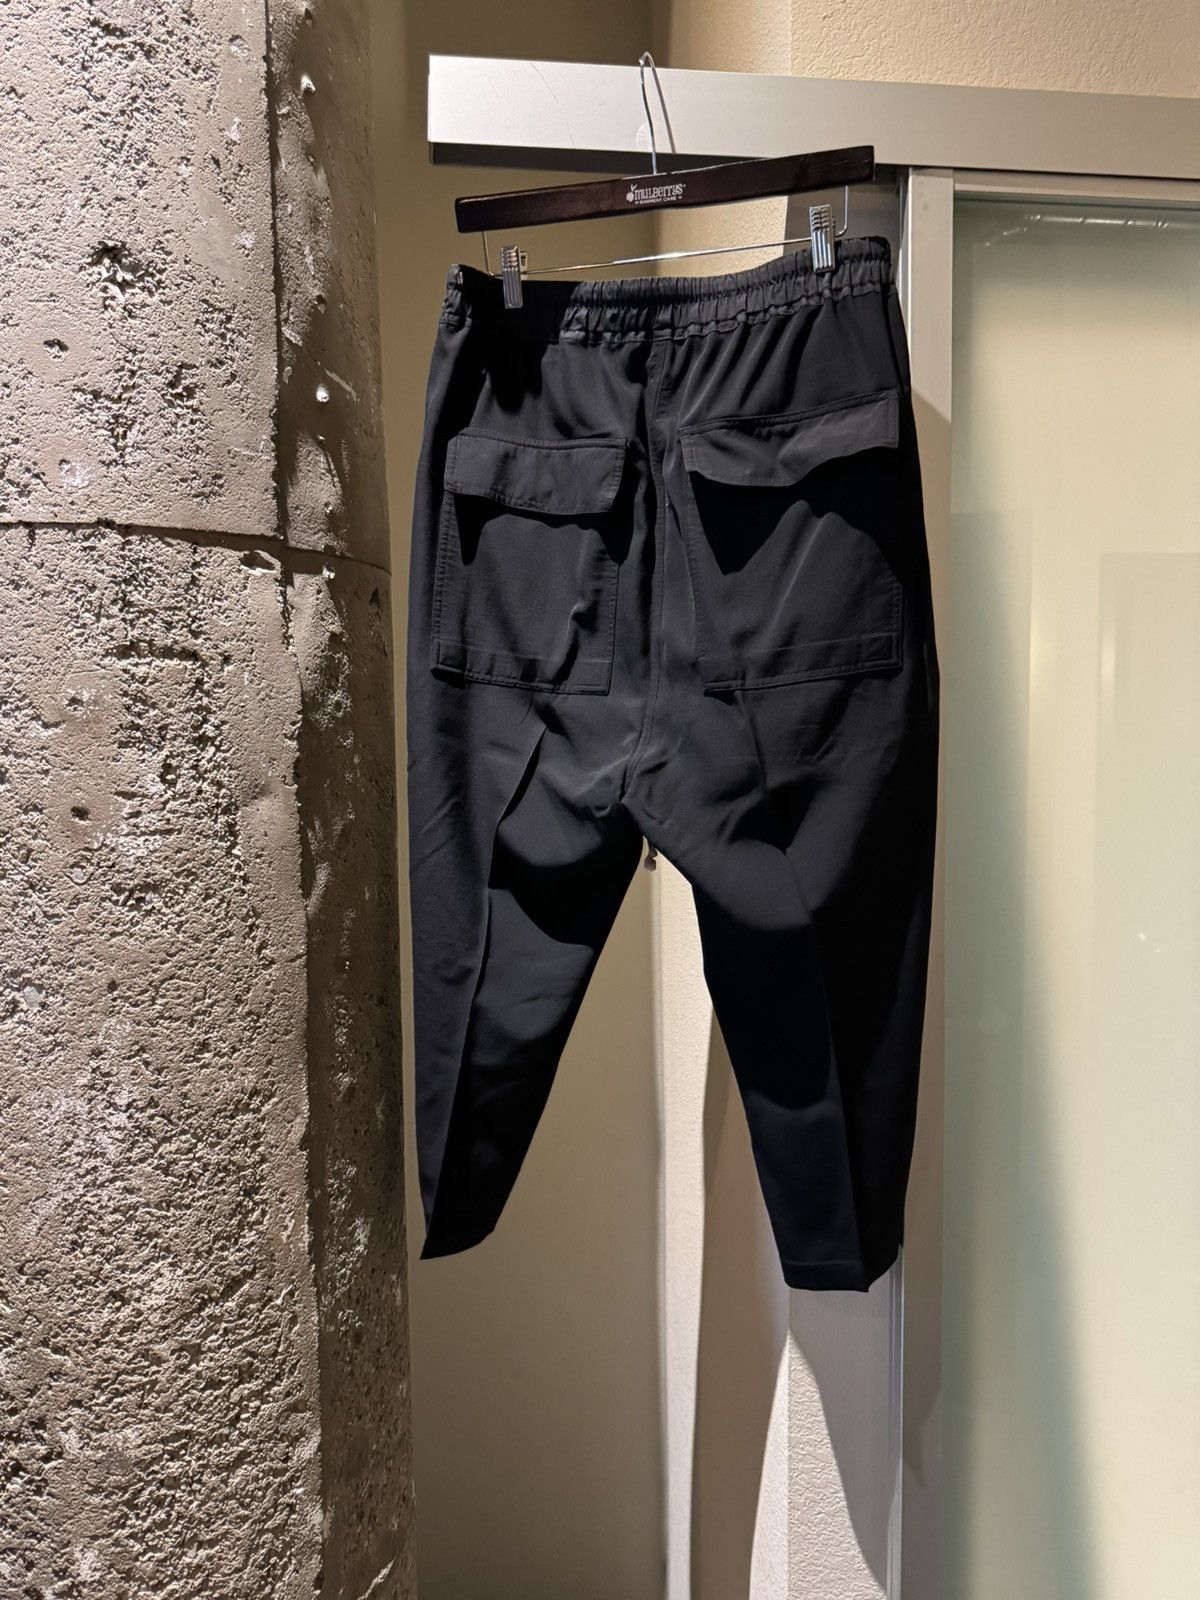 Rick Owens Cropped Astaire | Grailed